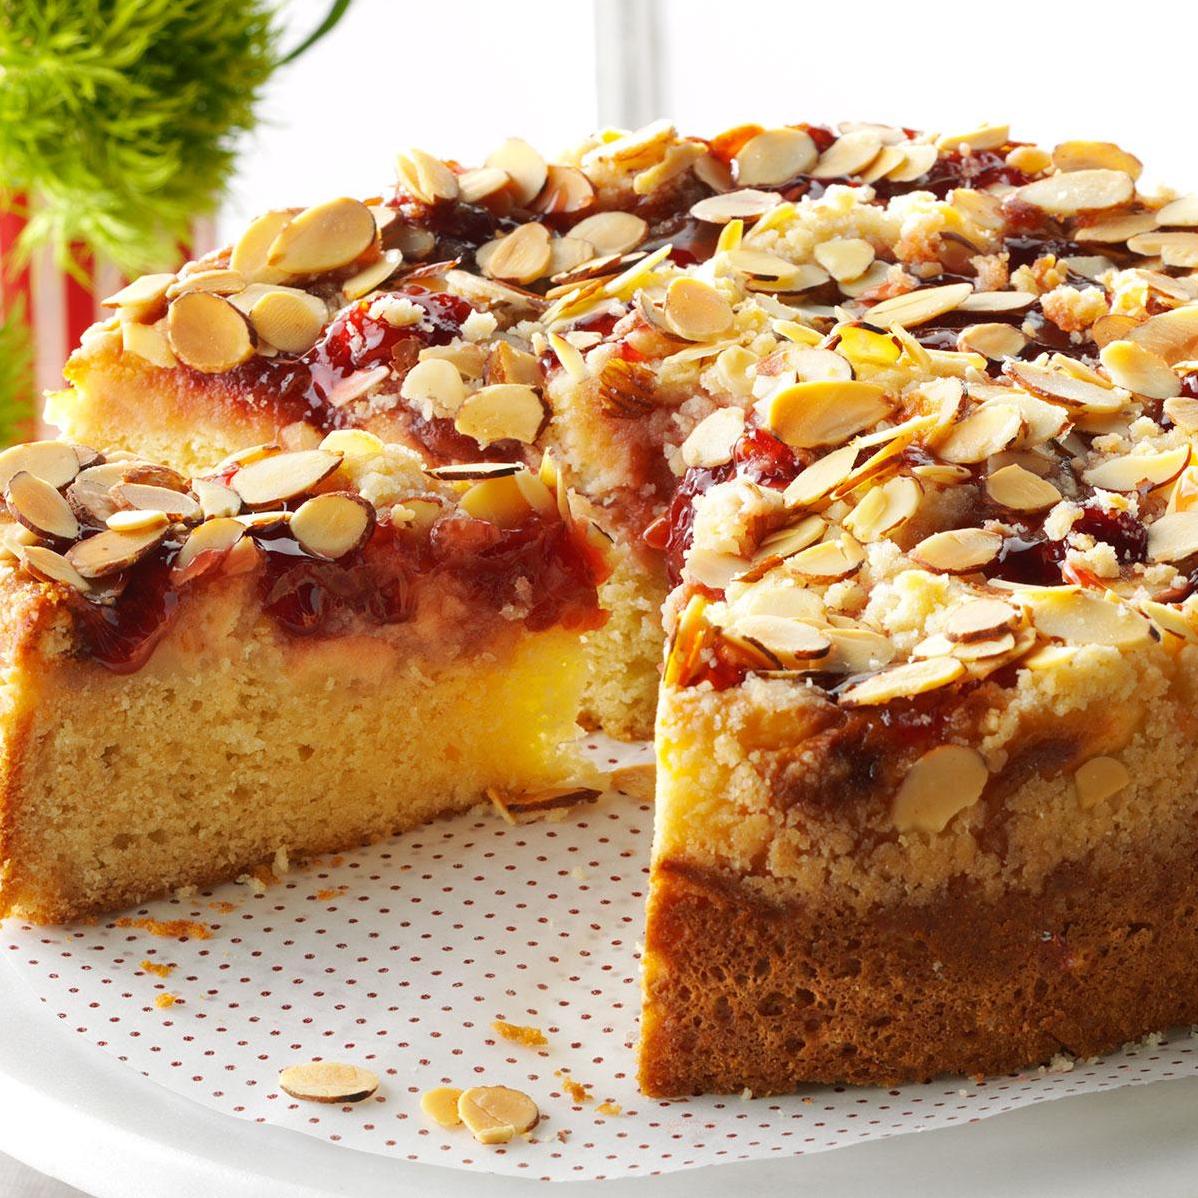  Cheers to a perfect morning, with our delicious coffee cake!